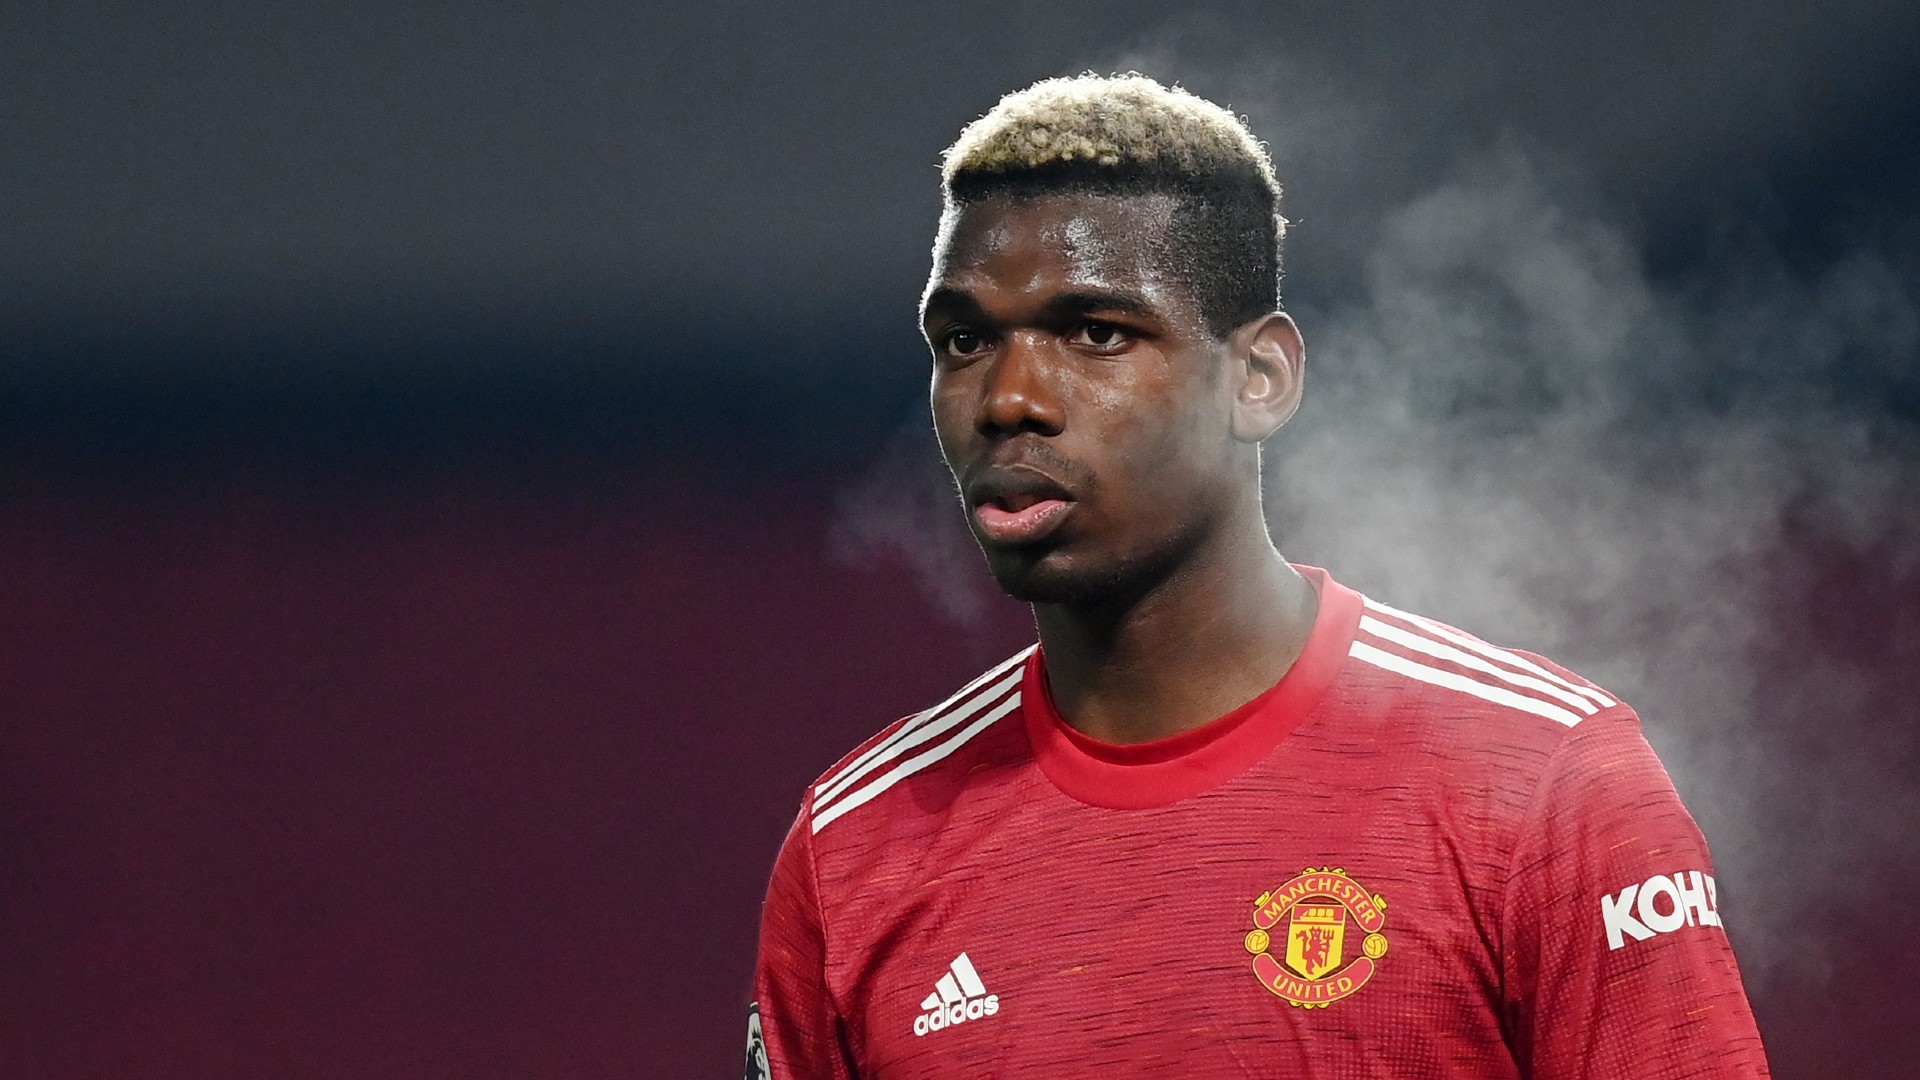 'Man Utd are now seeing the best of Pogba' - Frenchman can take Red Devils to the title, says Neville